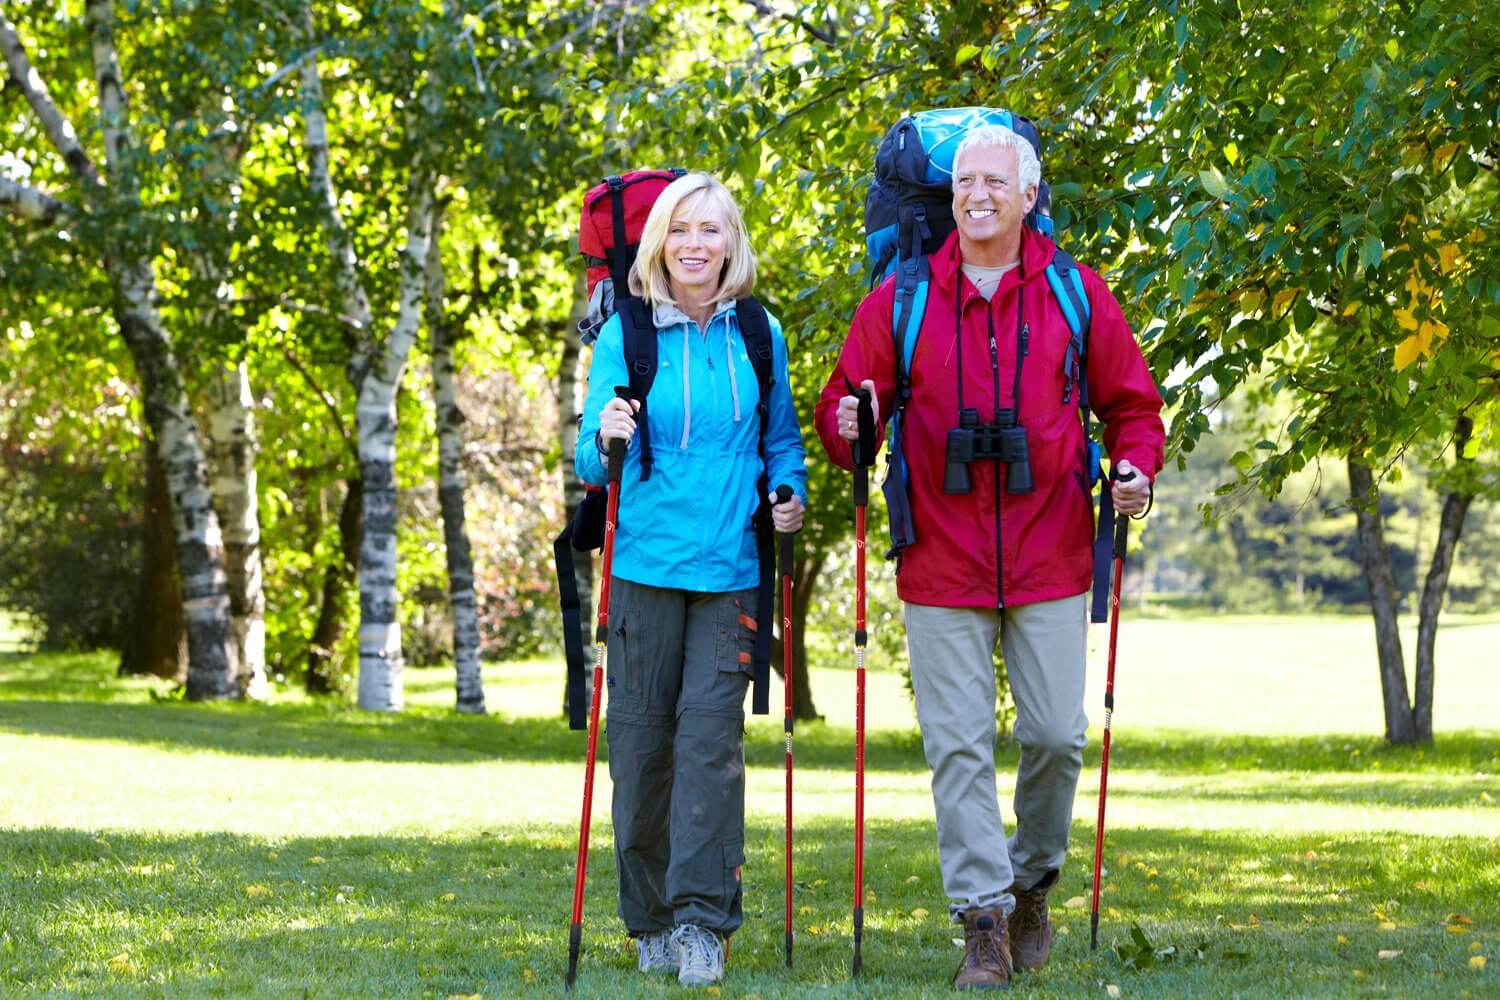 8 Reasons Why Seniors Should Join hiking clubs + Safety Tips ... - Prosource Trekking Poles Image 1500x1000 4149e250 1ce2 4614 8fc0 2637cD35578a